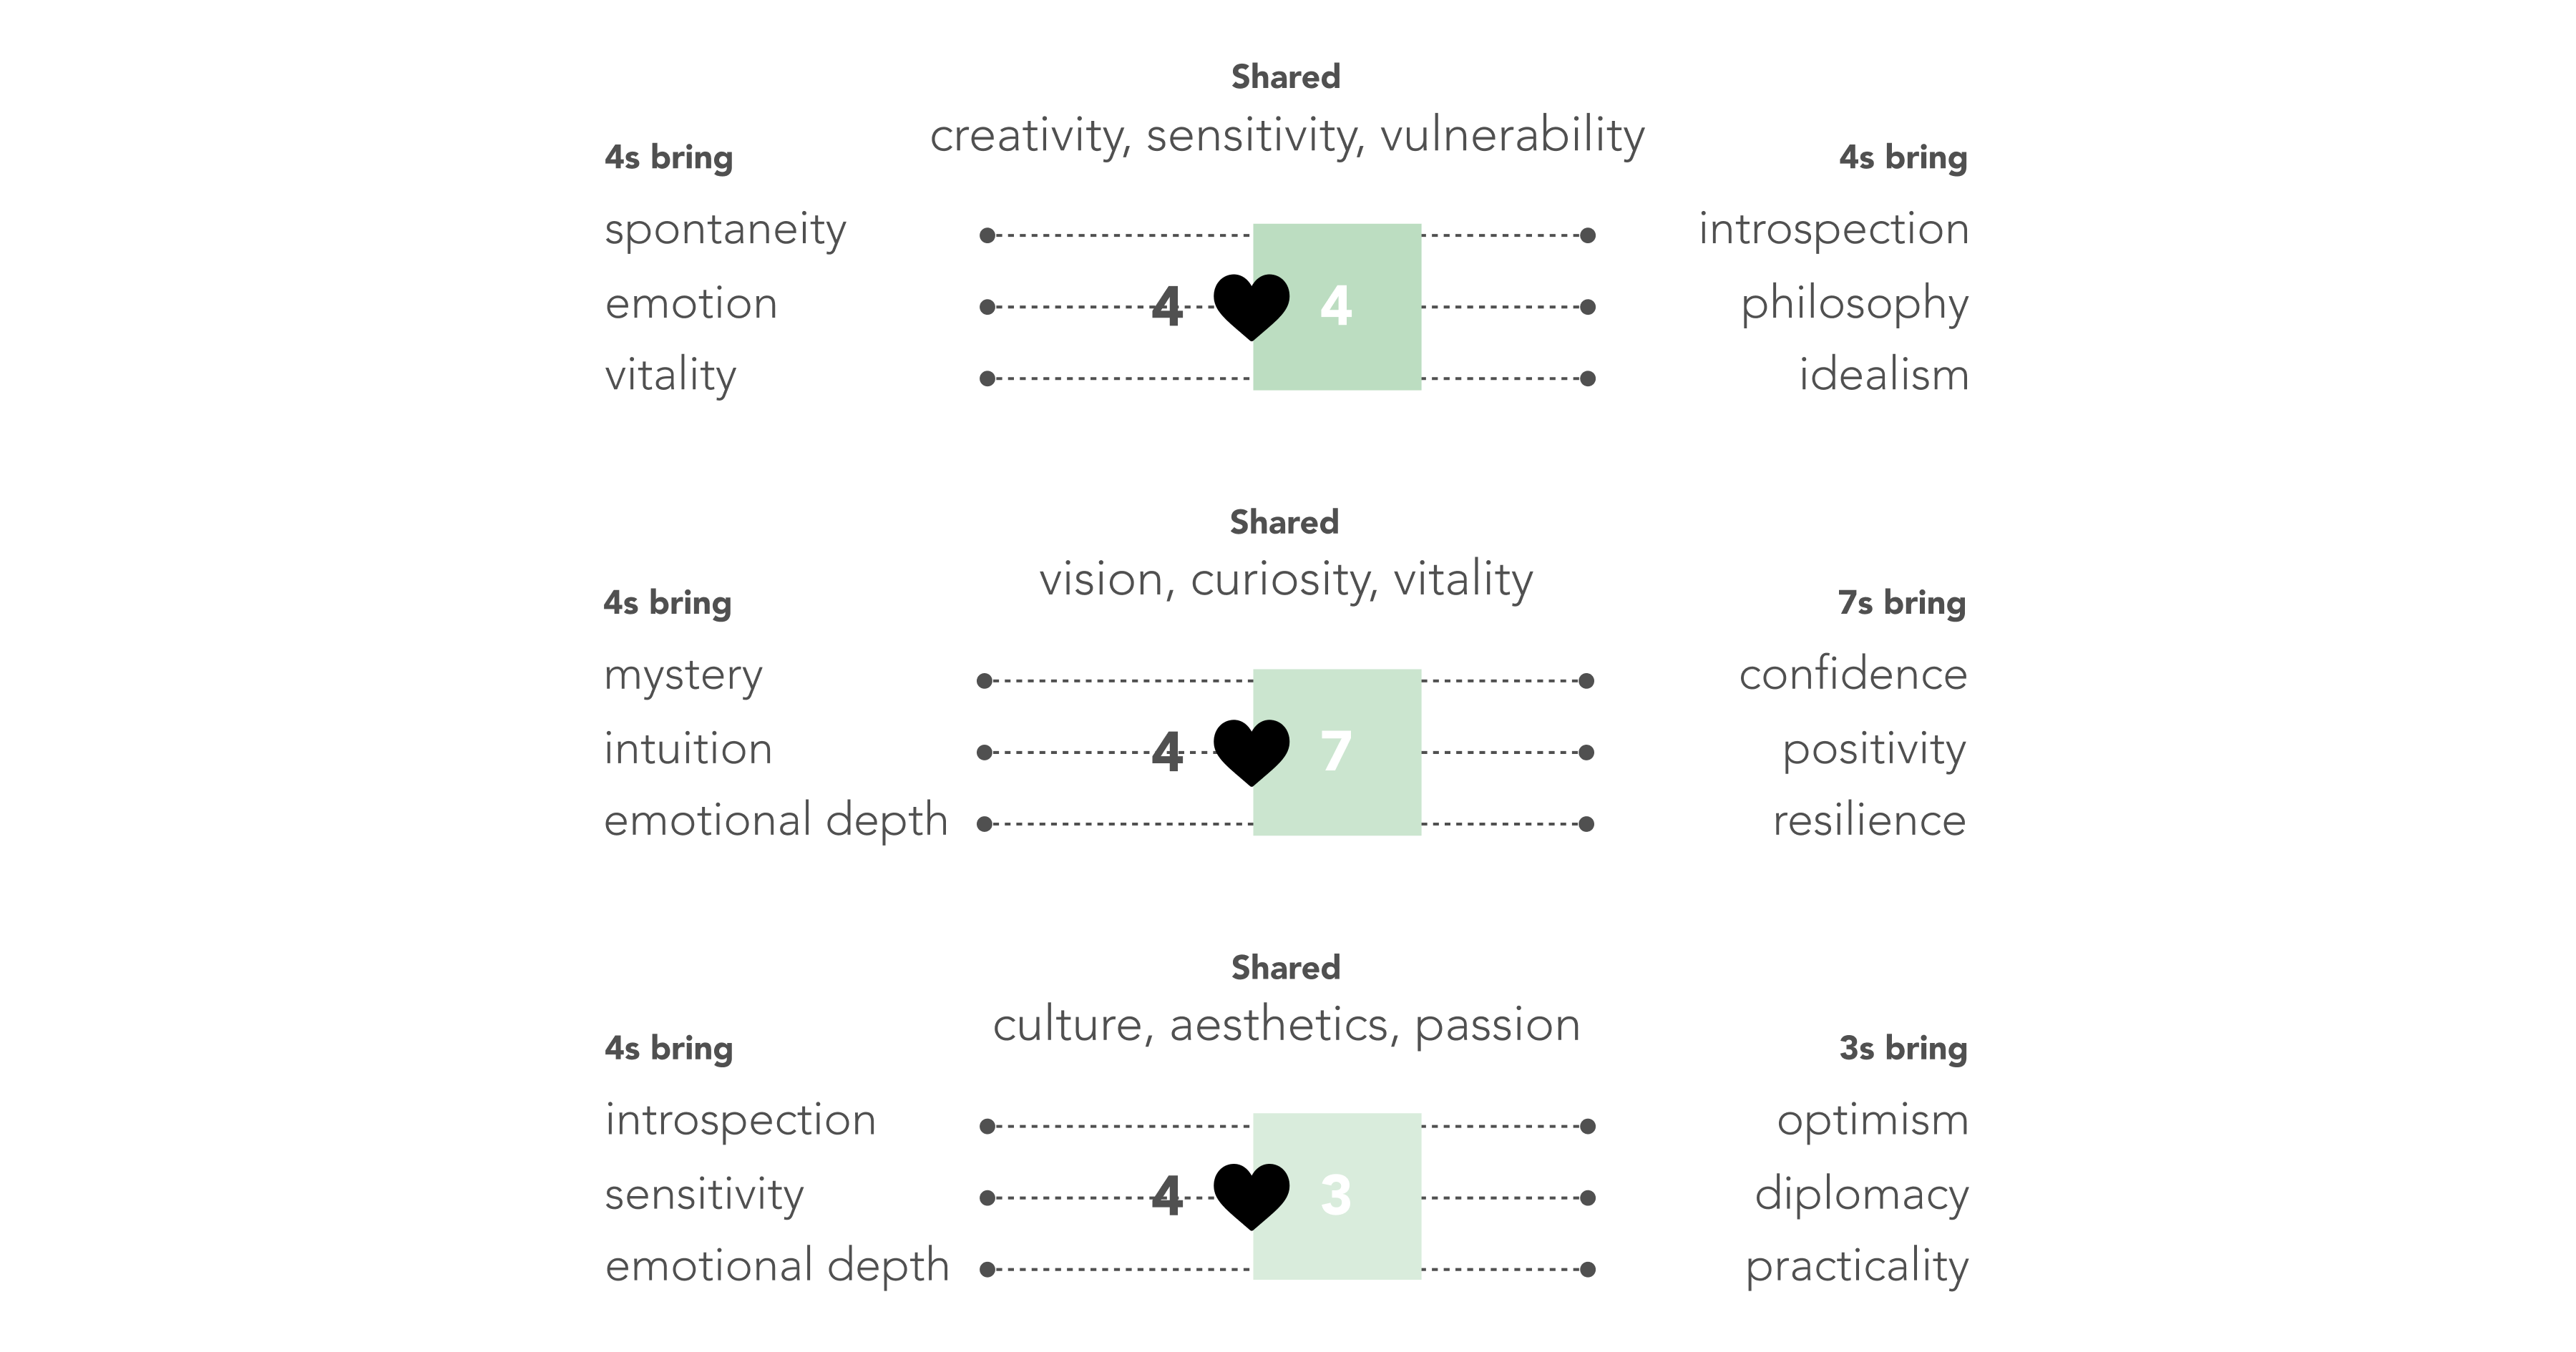 4s and 4s share creativity, sensitivity, vulnerability. 4s bring spontaneity, emotion, vitality, while other 4s bring introspection, philosophy, idealism. 4s and 7s share vision, curiosity, vitality. 4s bring mystery, intuition, emotional depth, while 7s bring confidence, positivity, resilience. 4s and 3s share culture, aesthetics, passion. 4s bring introspection, sensitivity, emotional depth, while 3s bring optimism, diplomacy, practicality.